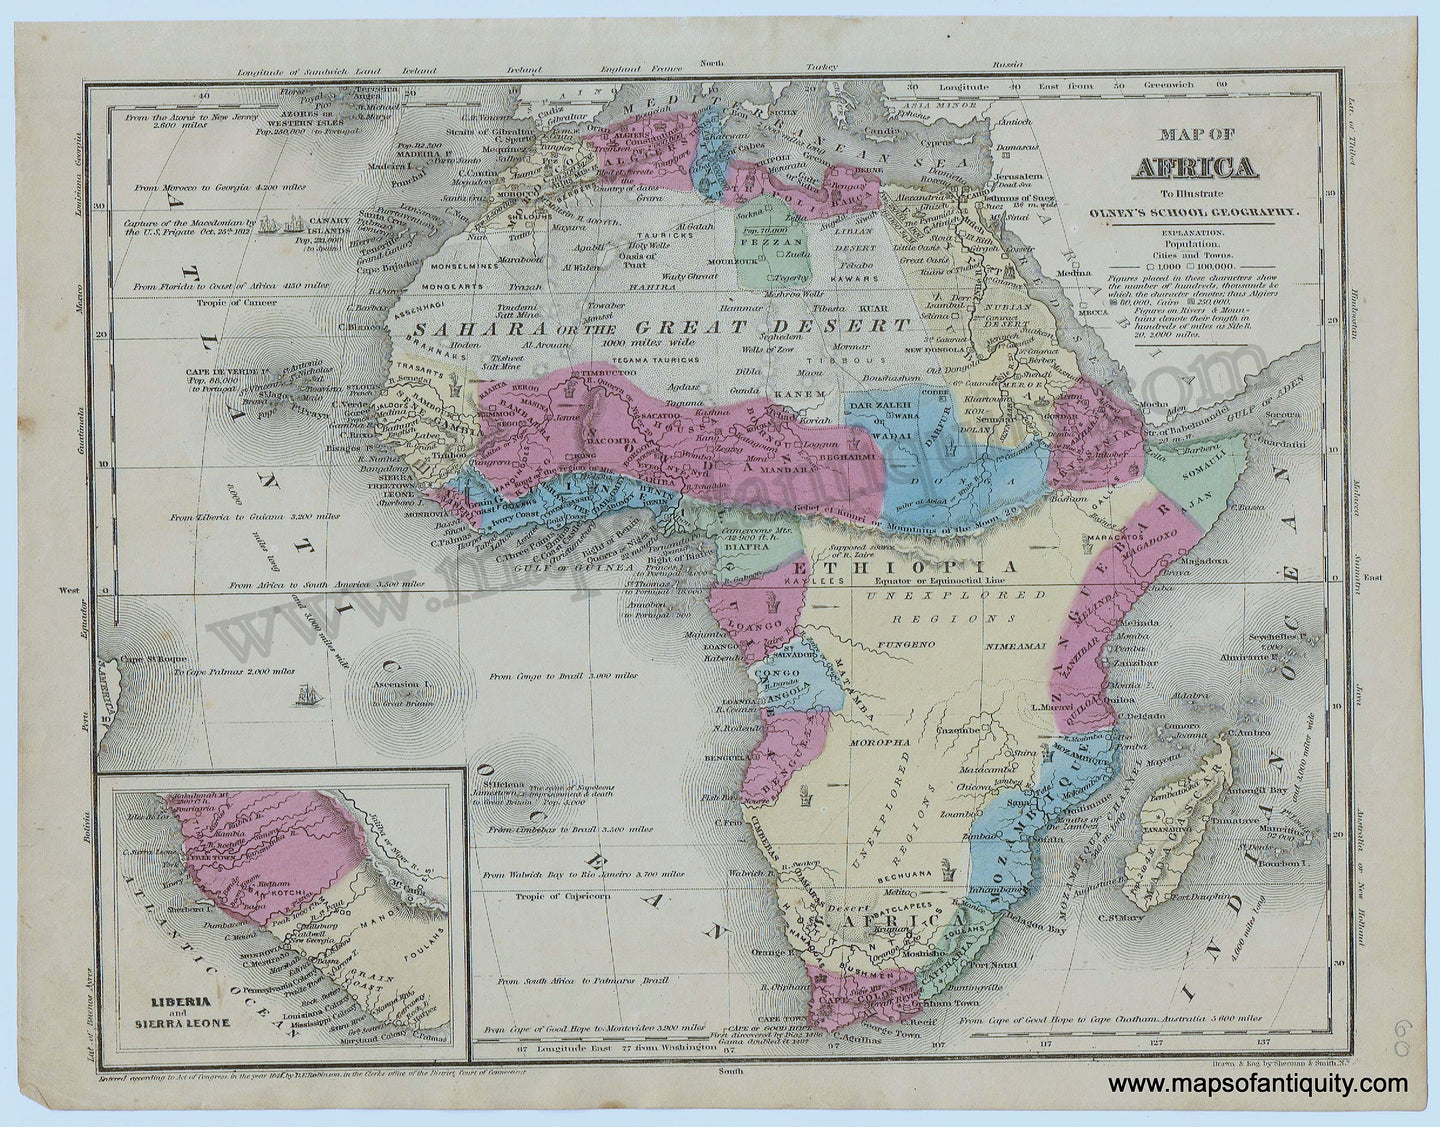 Antique-Hand-Colored-Map-Map-of-Africa-to-Illustrate-Olney's-School-Geograpy-1844-Robinson-/-Olney-1800s-19th-century-Maps-of-Antiquity